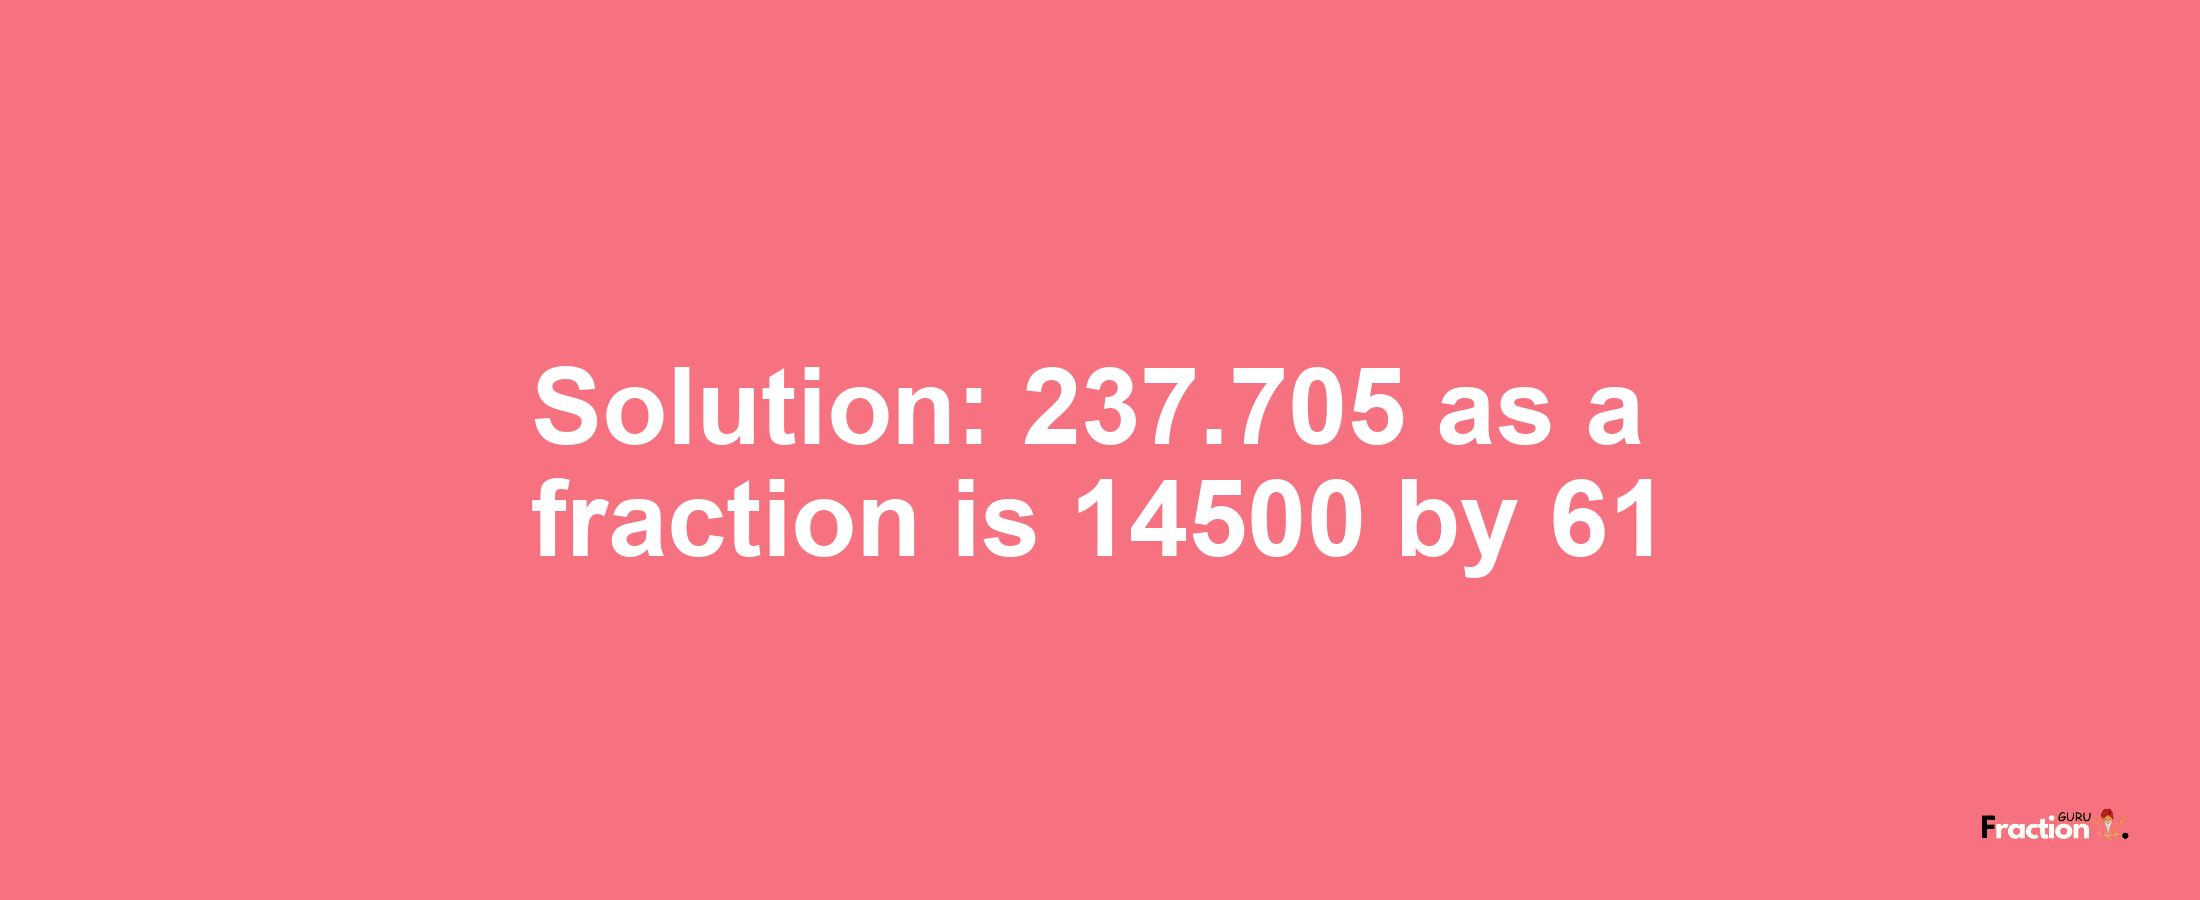 Solution:237.705 as a fraction is 14500/61